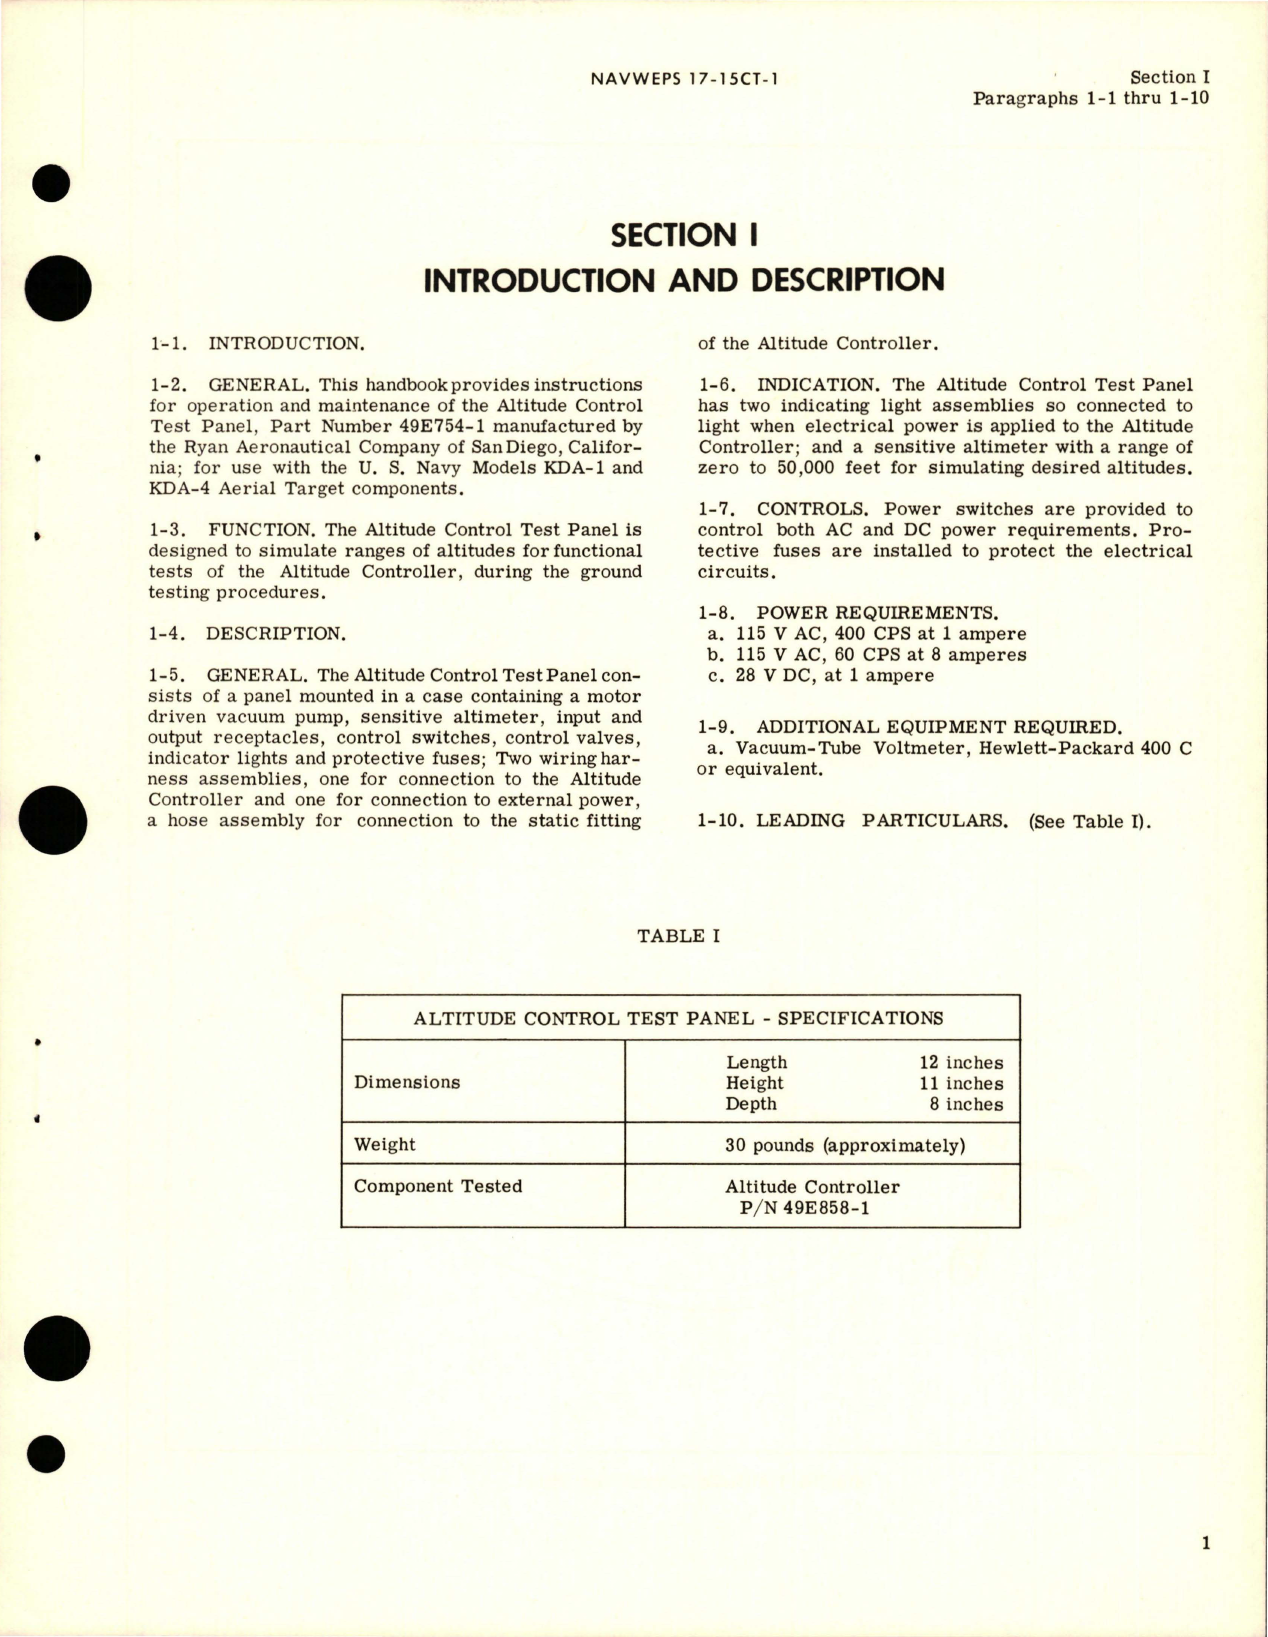 Sample page 5 from AirCorps Library document: Operation, Service Instructions and Parts Breakdown for Altitude Control Test Panel - Part 49E754-1